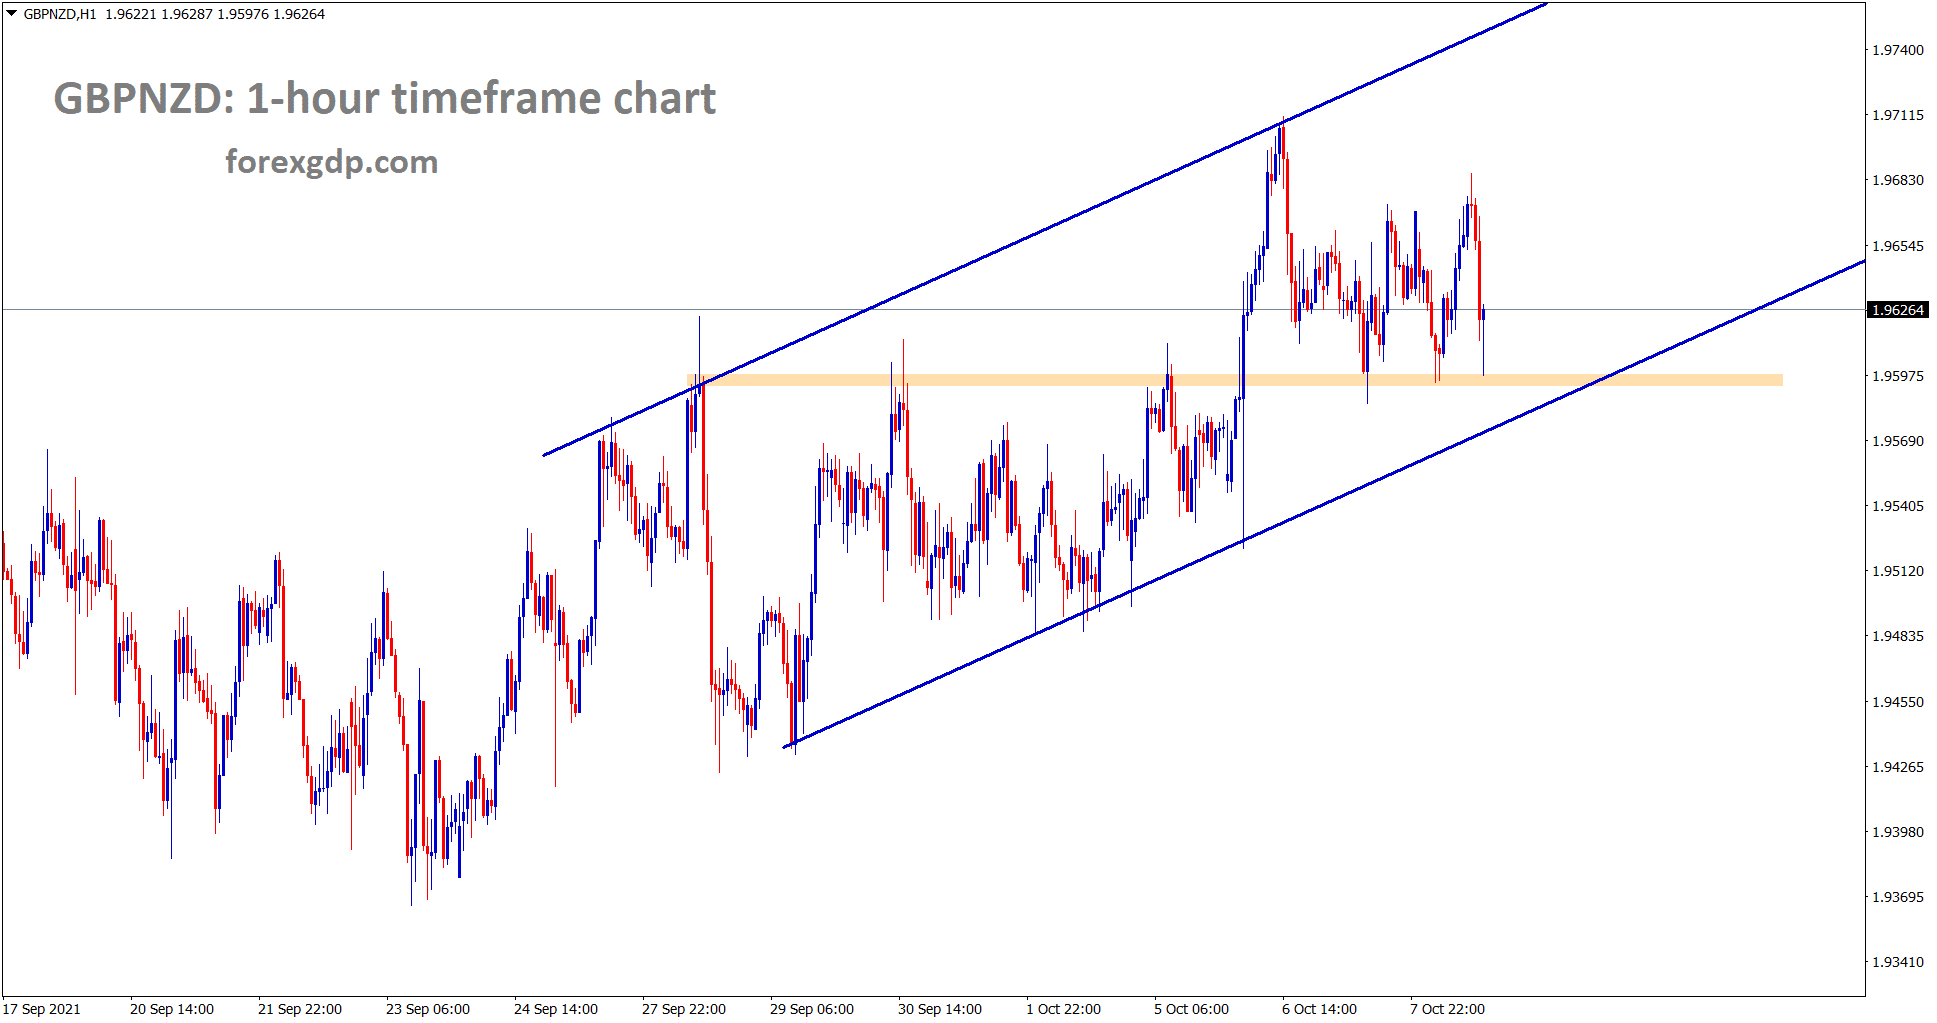 GBPNZD is moving in an Ascending channel forming higher highs and higher lows